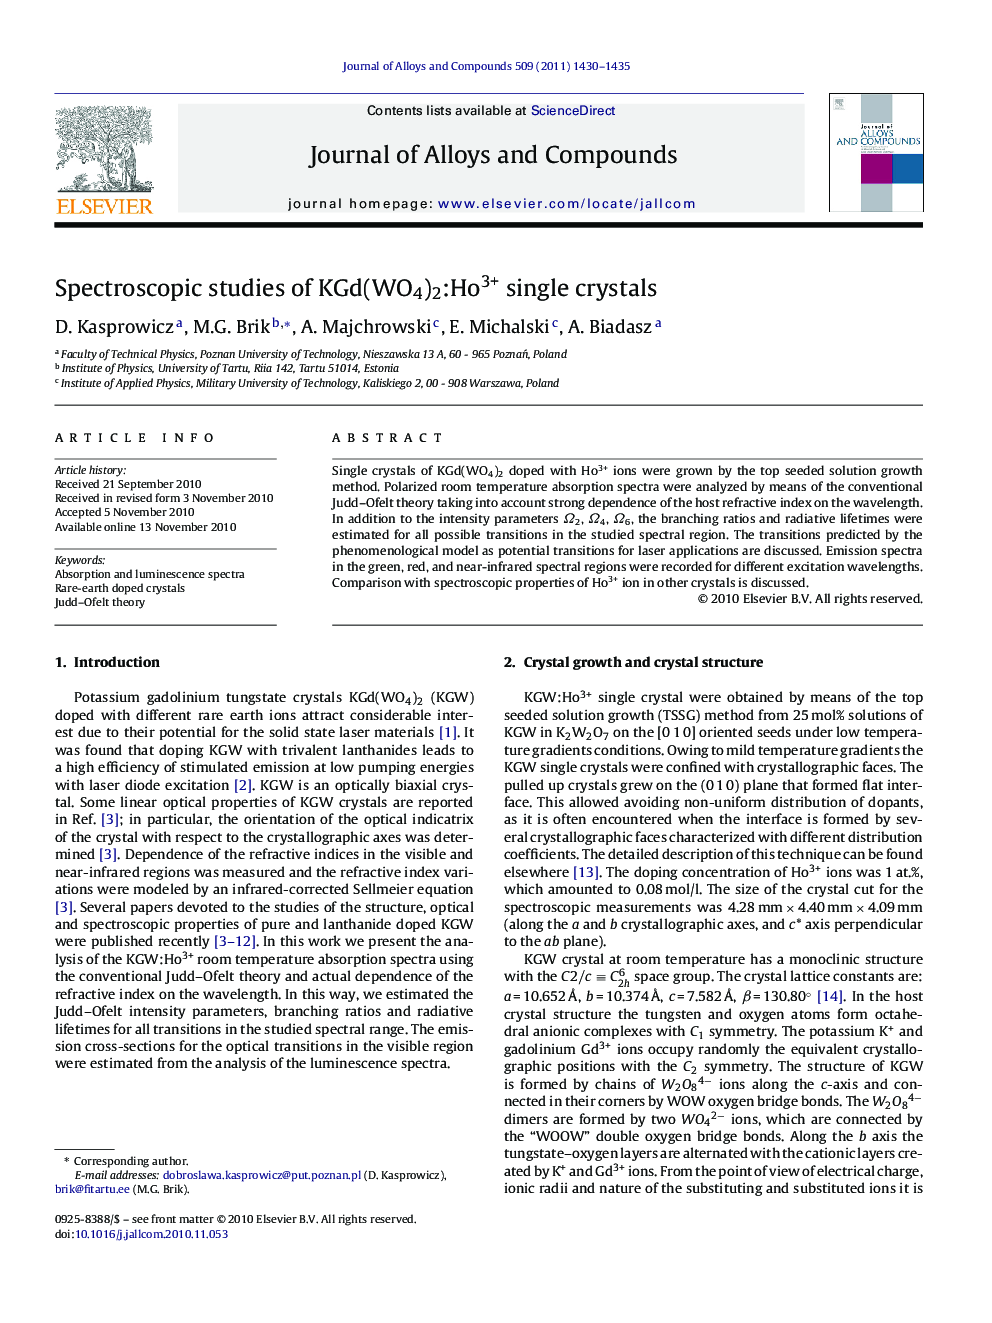 Spectroscopic studies of KGd(WO4)2:Ho3+ single crystals